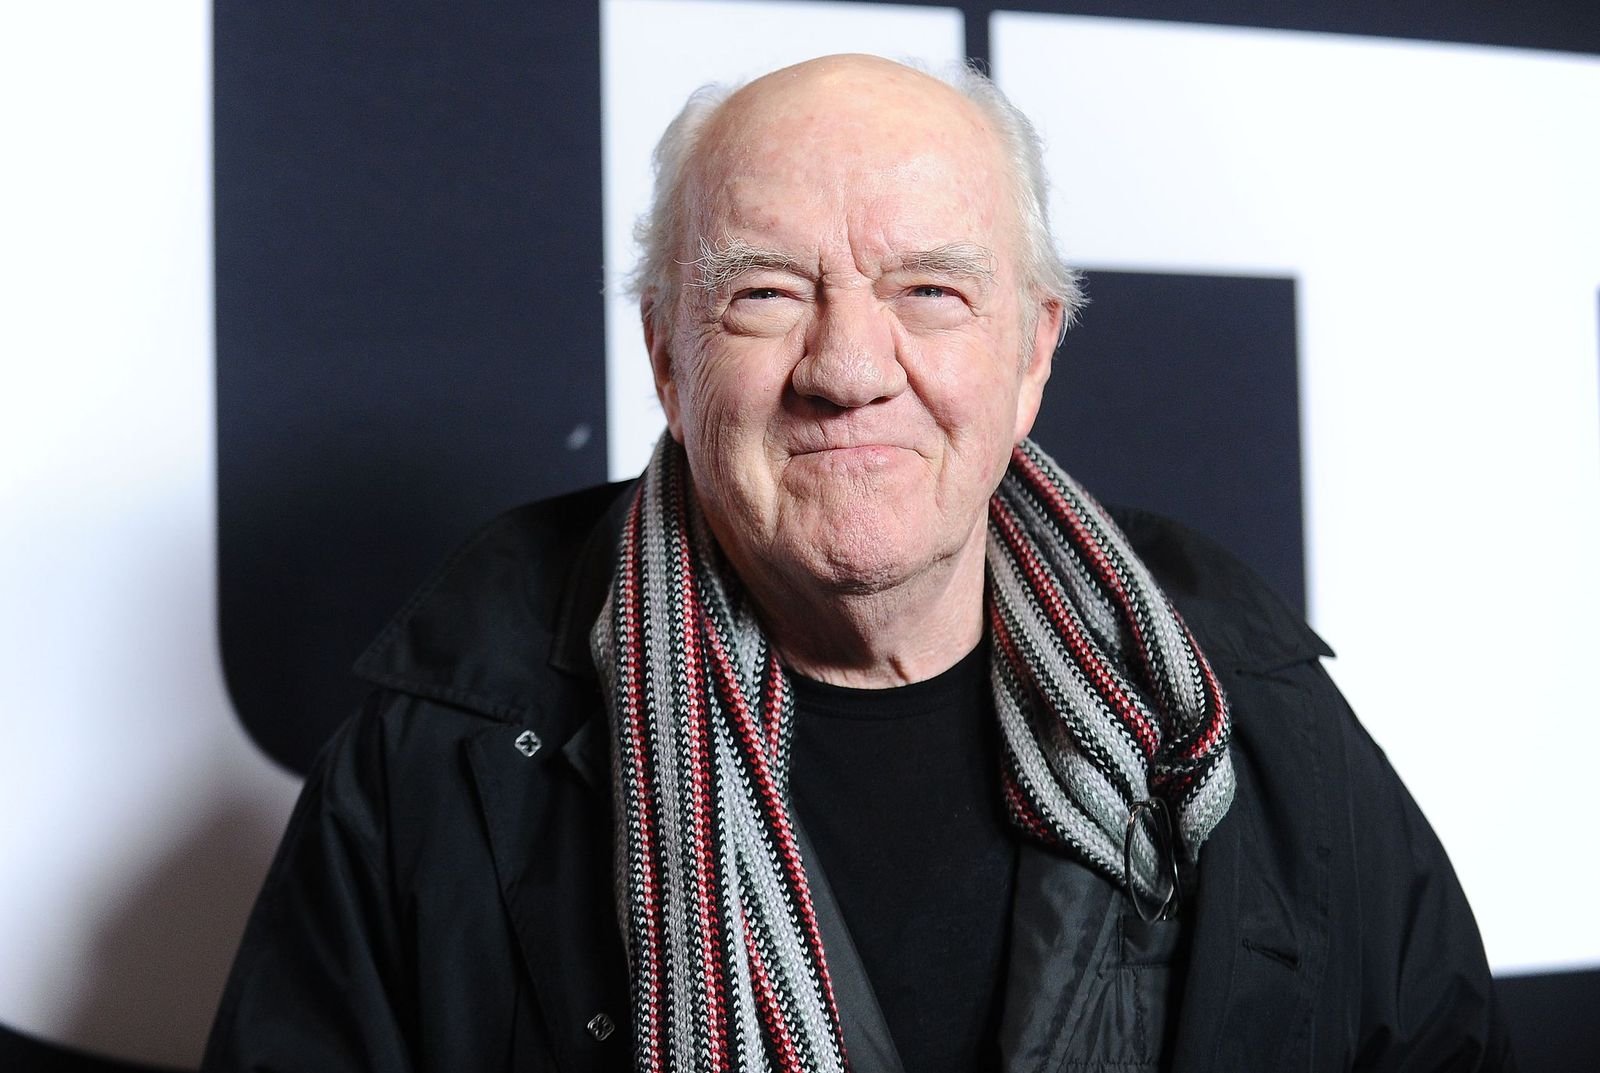 Richard Herd at a screening of "Get Out!" on February 10, 2017, in Los Angeles, California | Photo: Jason LaVeris/FilmMagic/Getty Images